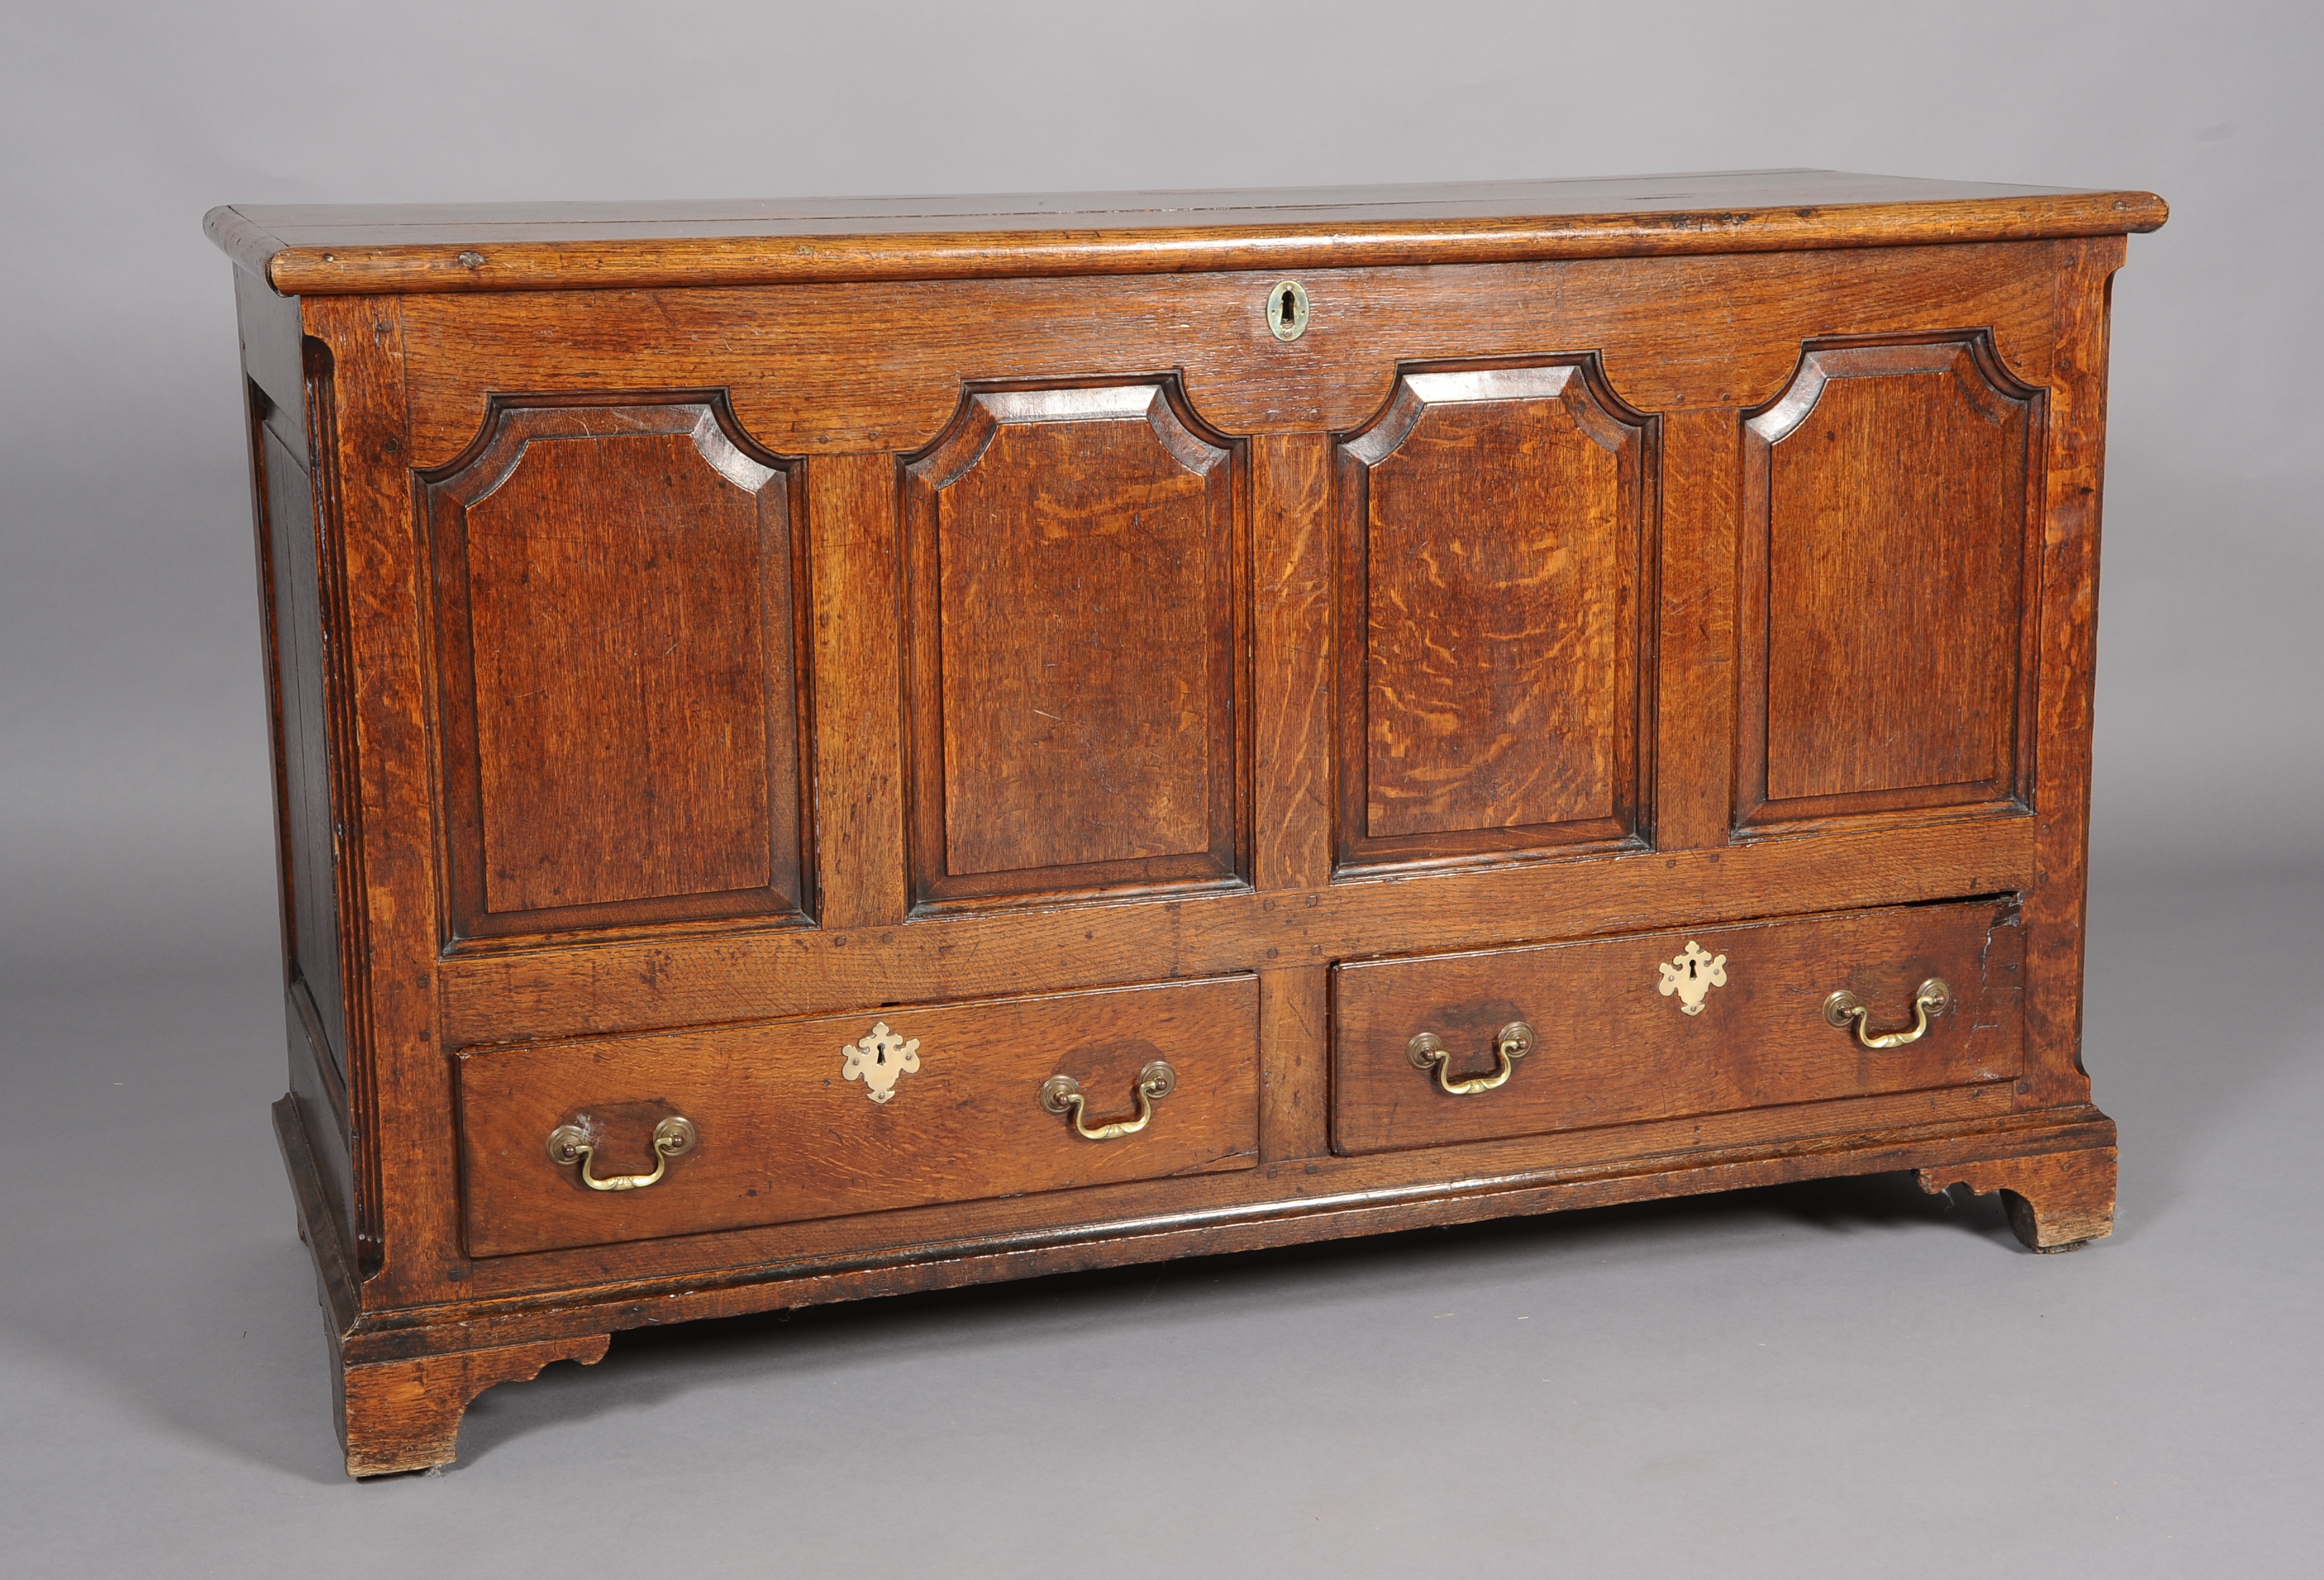 A MID 18TH CENTURY OAK MULE CHEST, having a planked top, above a quadruple ogee arch field-